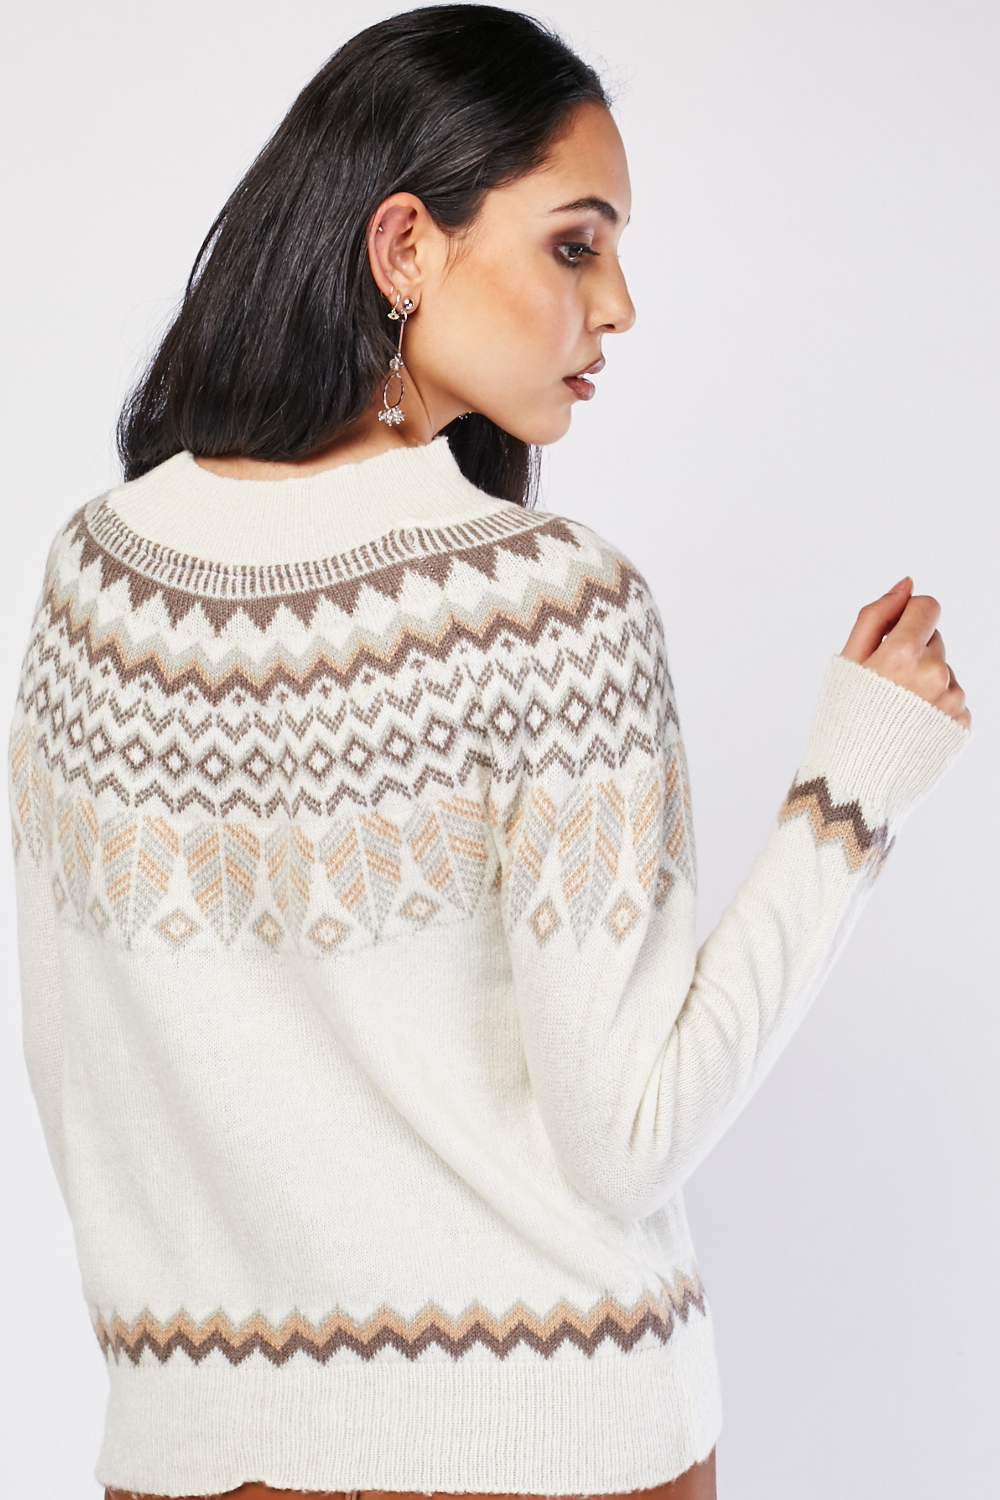 Fair Isle Knitwear: Une tradition intemporelle - Mike Nature